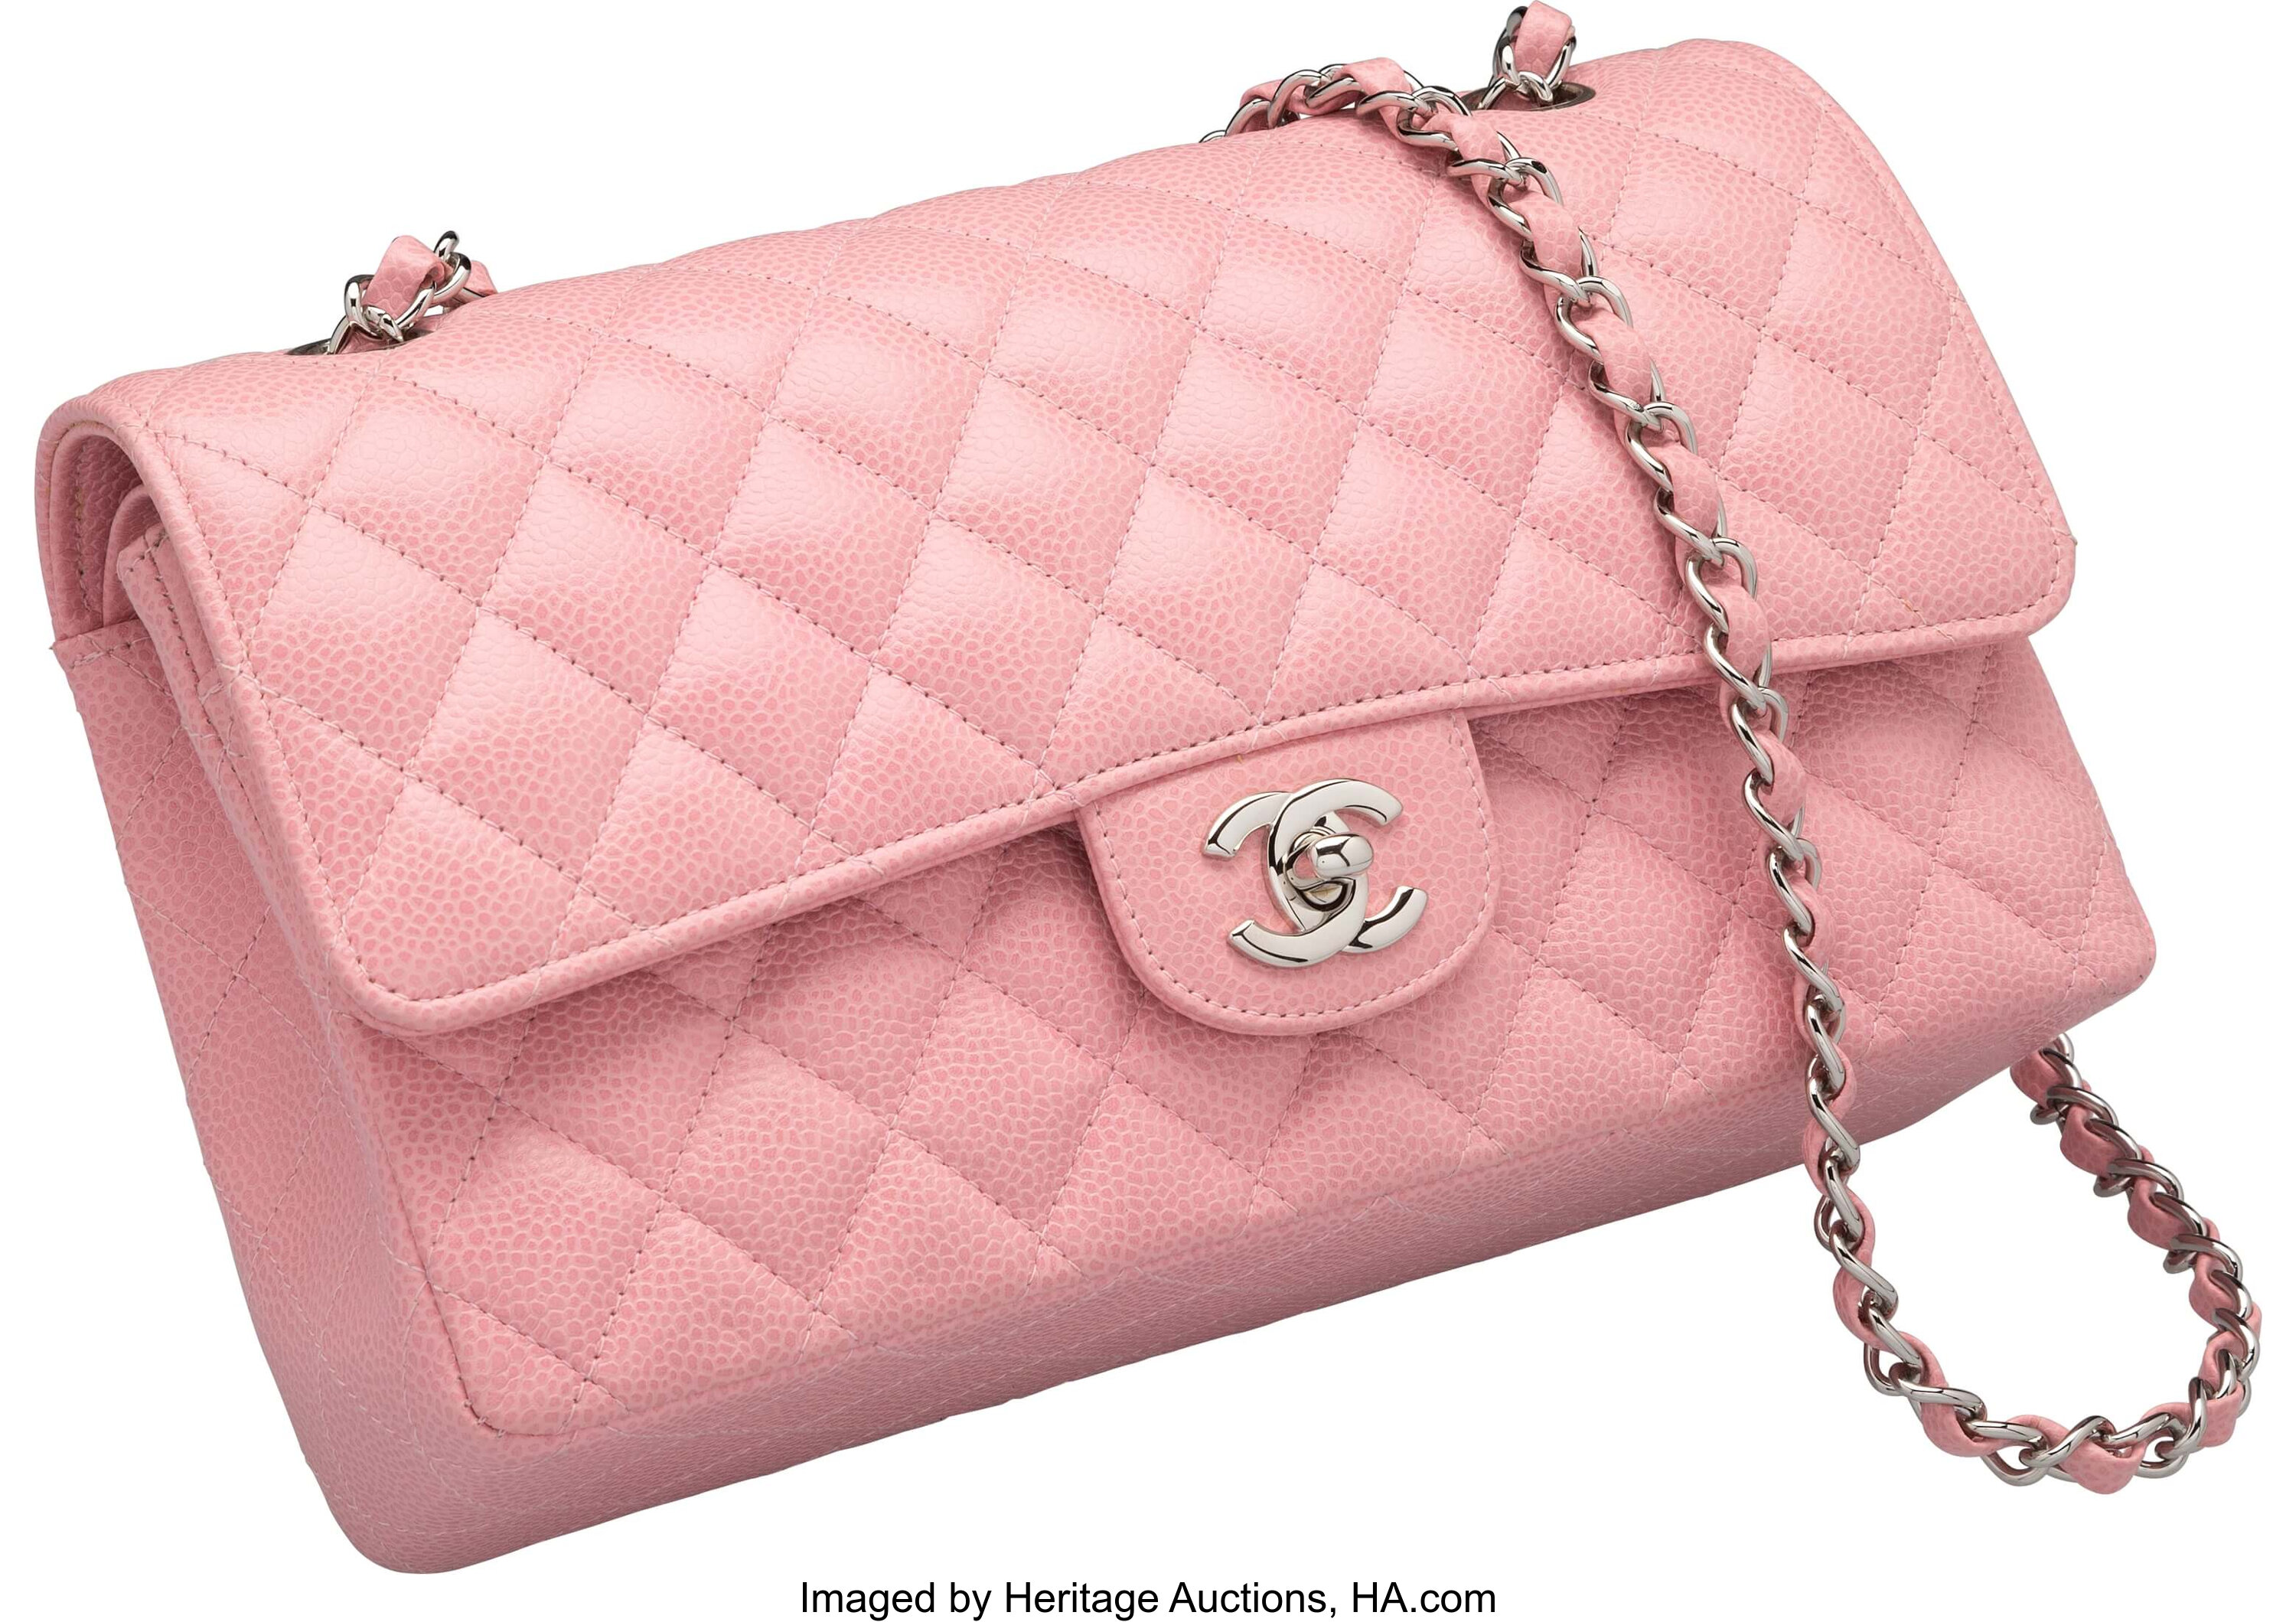 Bonhams : CHANEL PINK QUILTED CAVIAR LEATHER MEDIUM CLASSIC DOUBLE FLAP BAG  IN SILVER TONE HARDWARE (includes serial sticker, authenticity card,  original dust bag)